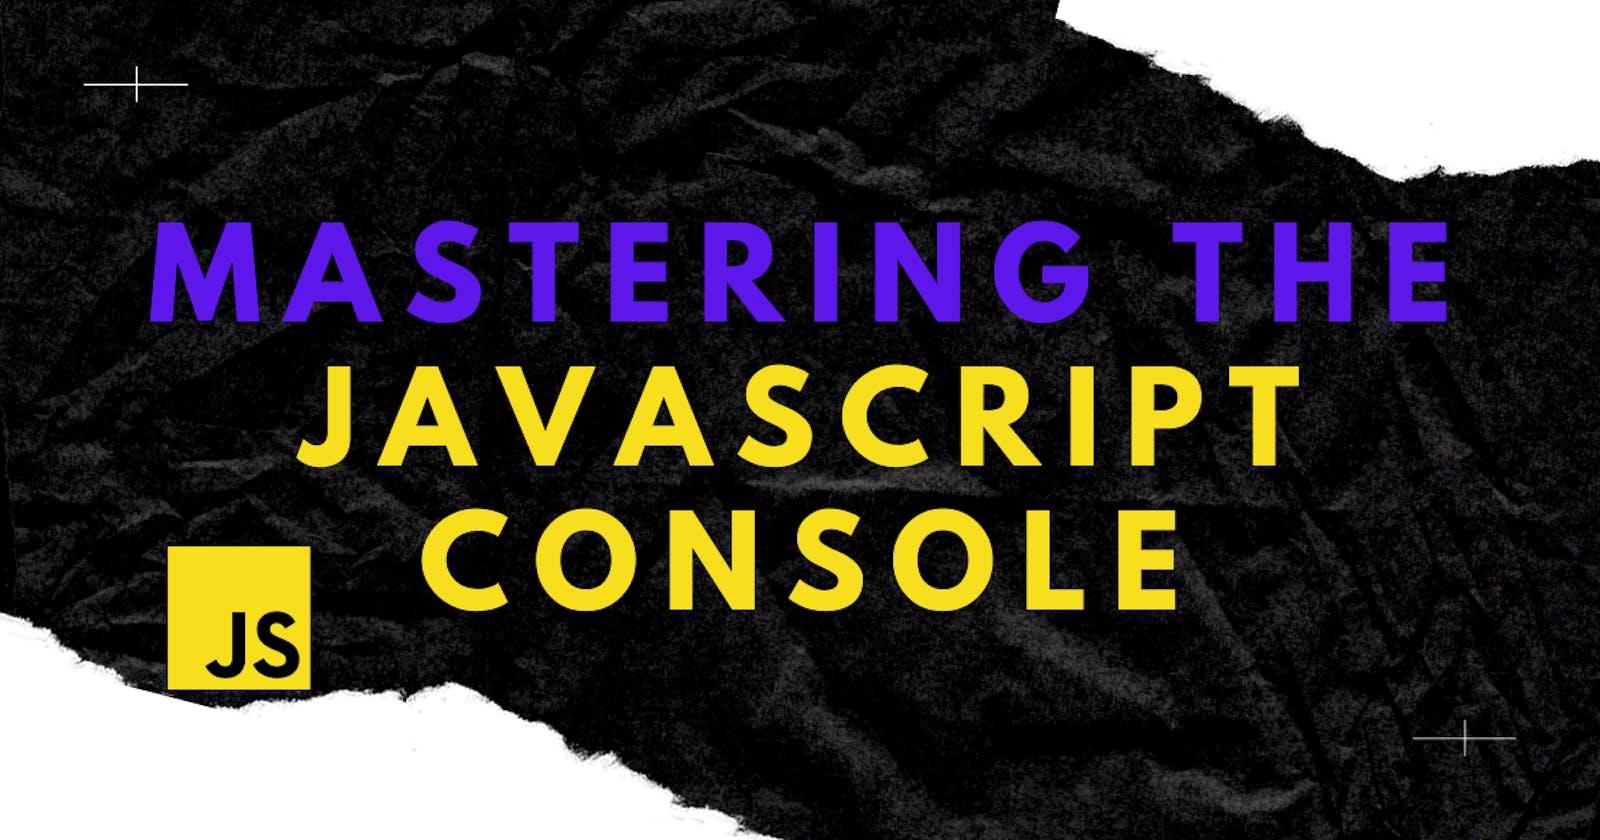 Mastering the JavaScript Console